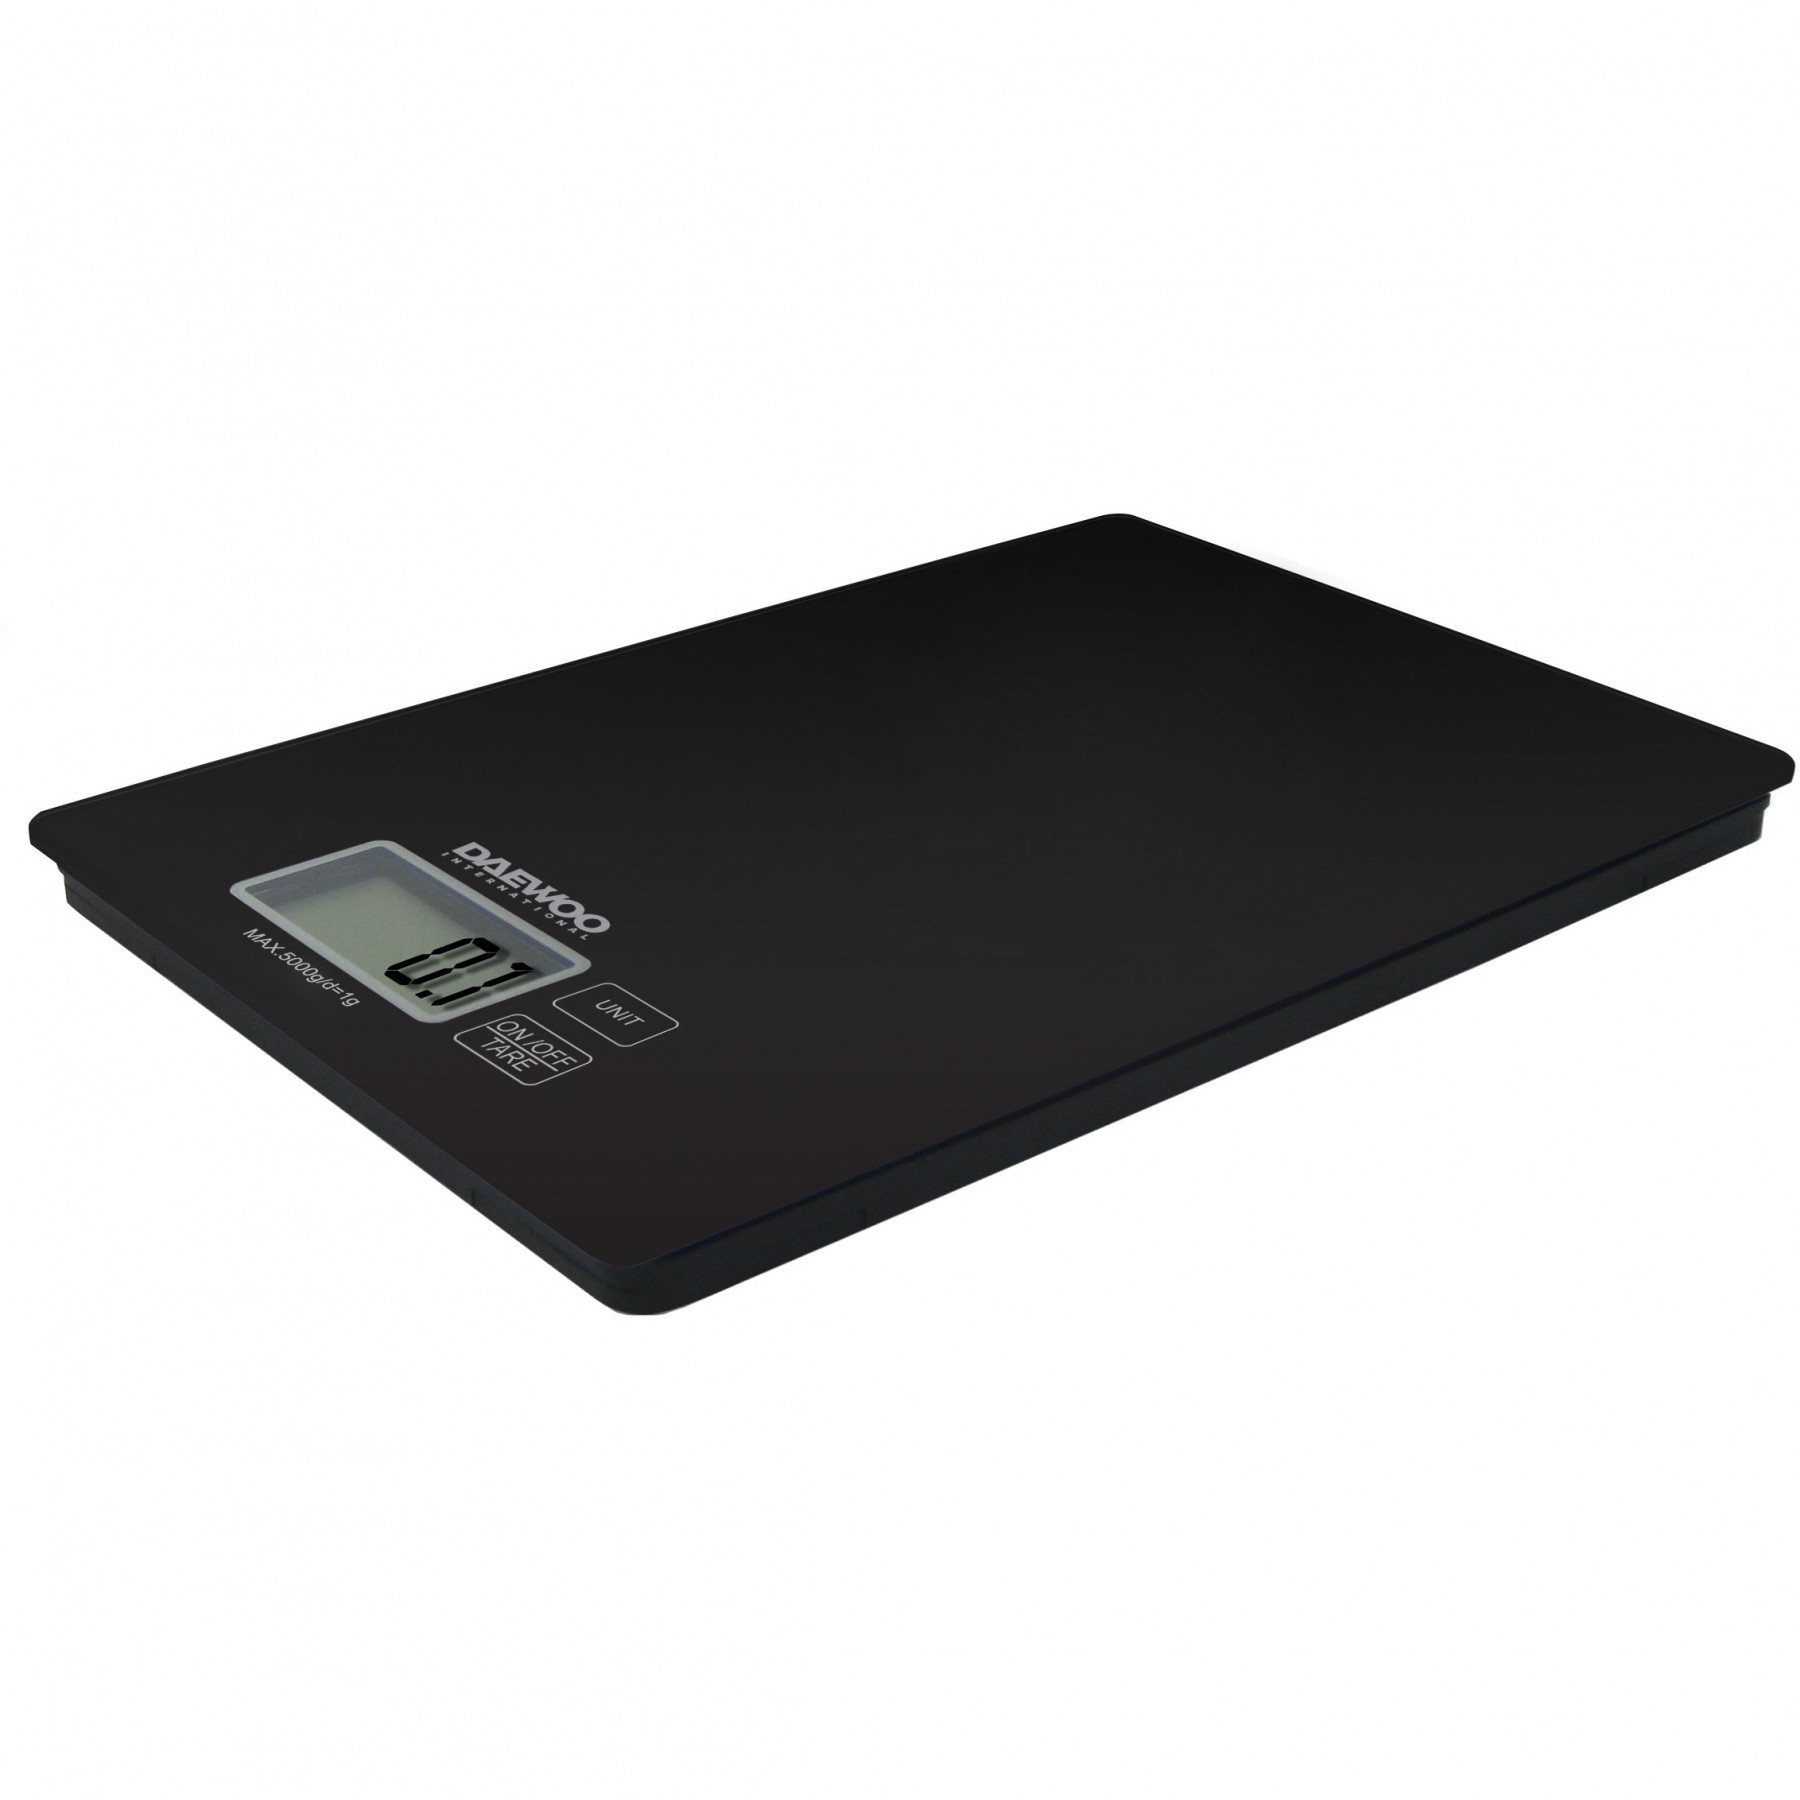 Daewoo Digital Electronic Kitchen Scale 5 Kg Weight for Cooking Black - KT391B